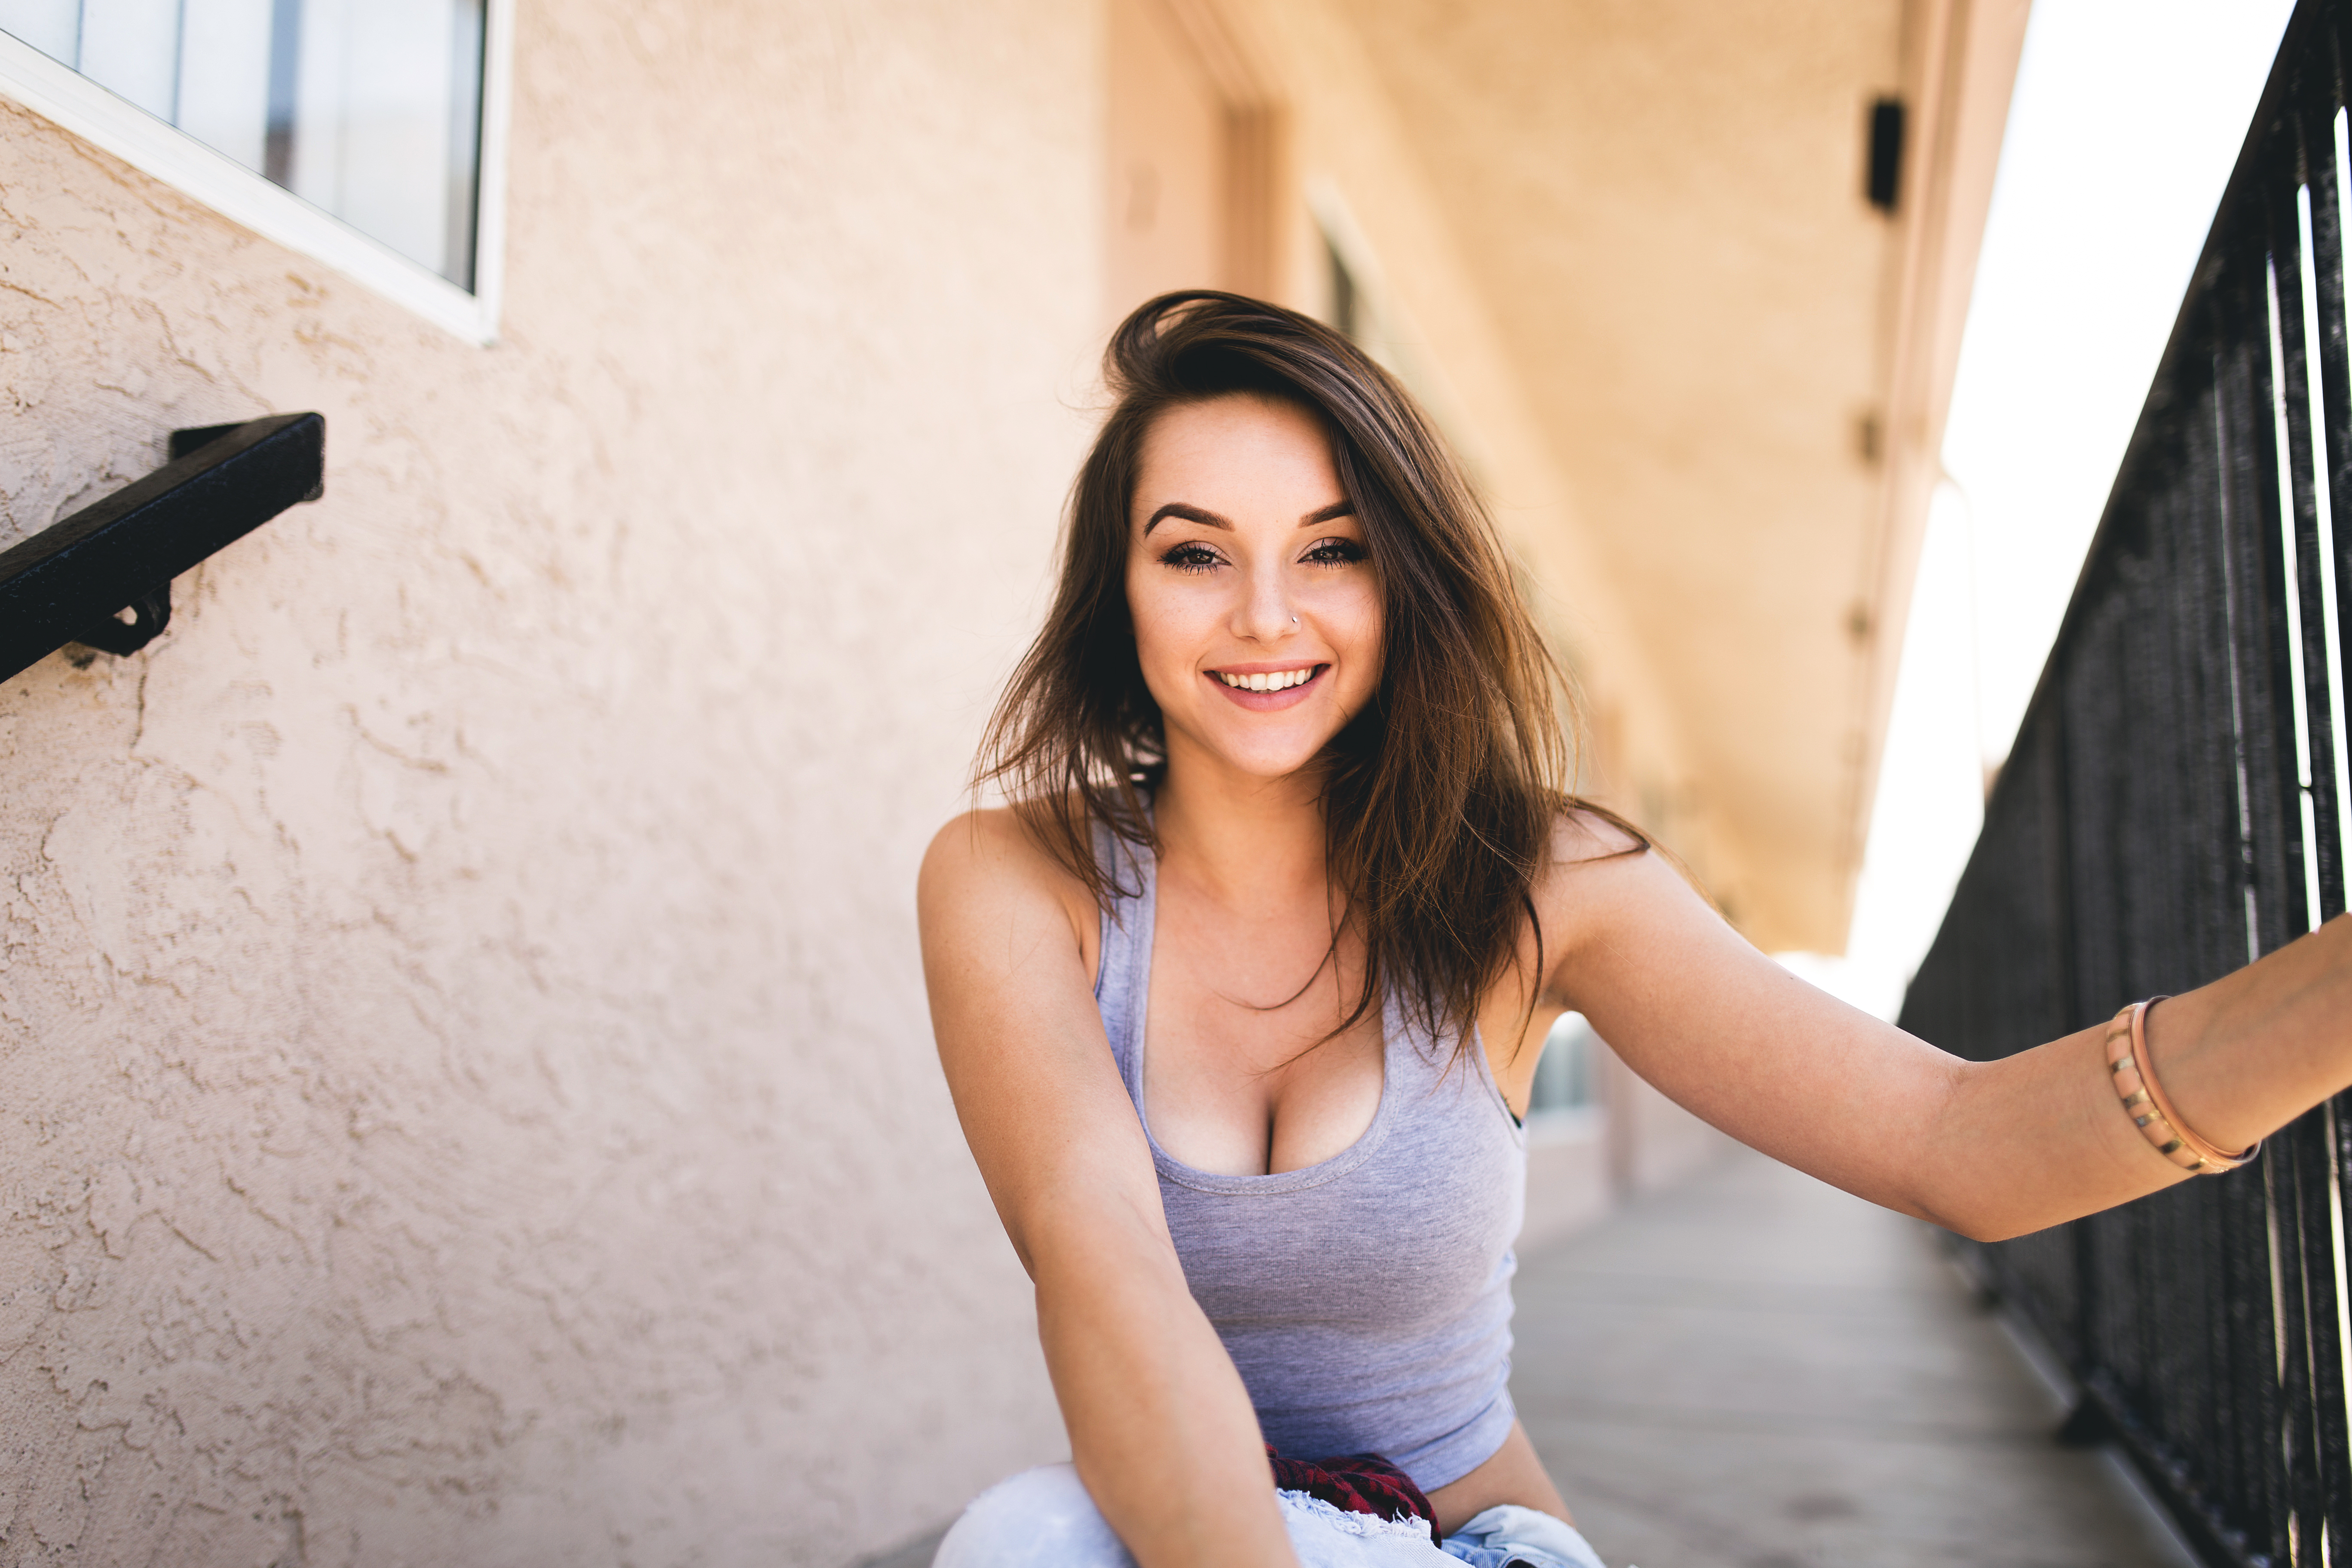 Women Model Portrait Smiling Looking At Viewer Grey Tops Sitting Outdoors Women Outdoors Depth Of Fi 5472x3648